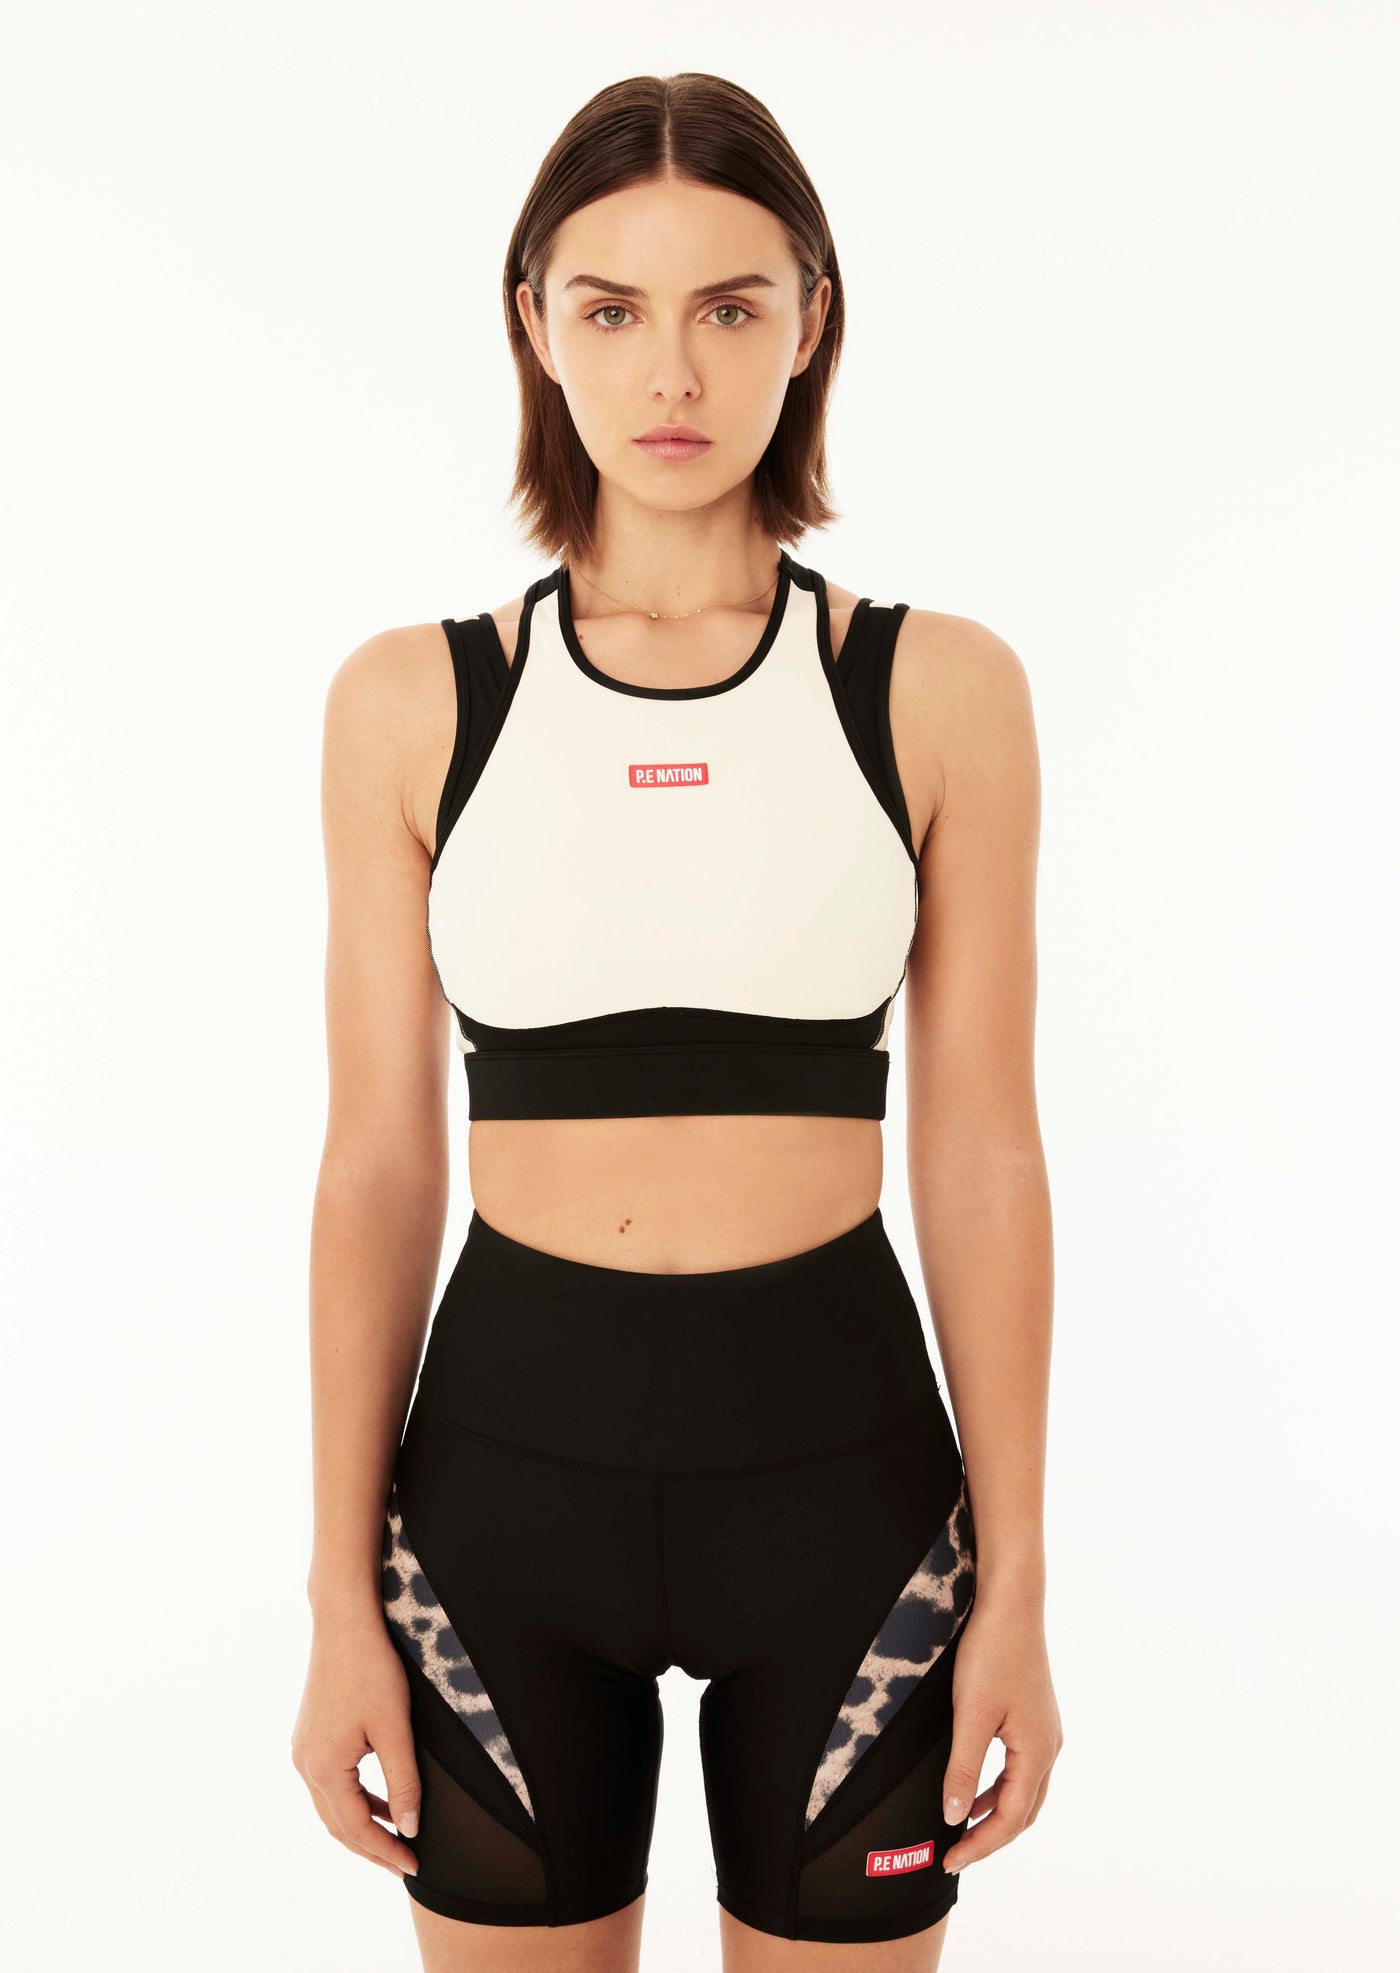 P.E Nation Fairway Sports Bra in Pearled Ivory